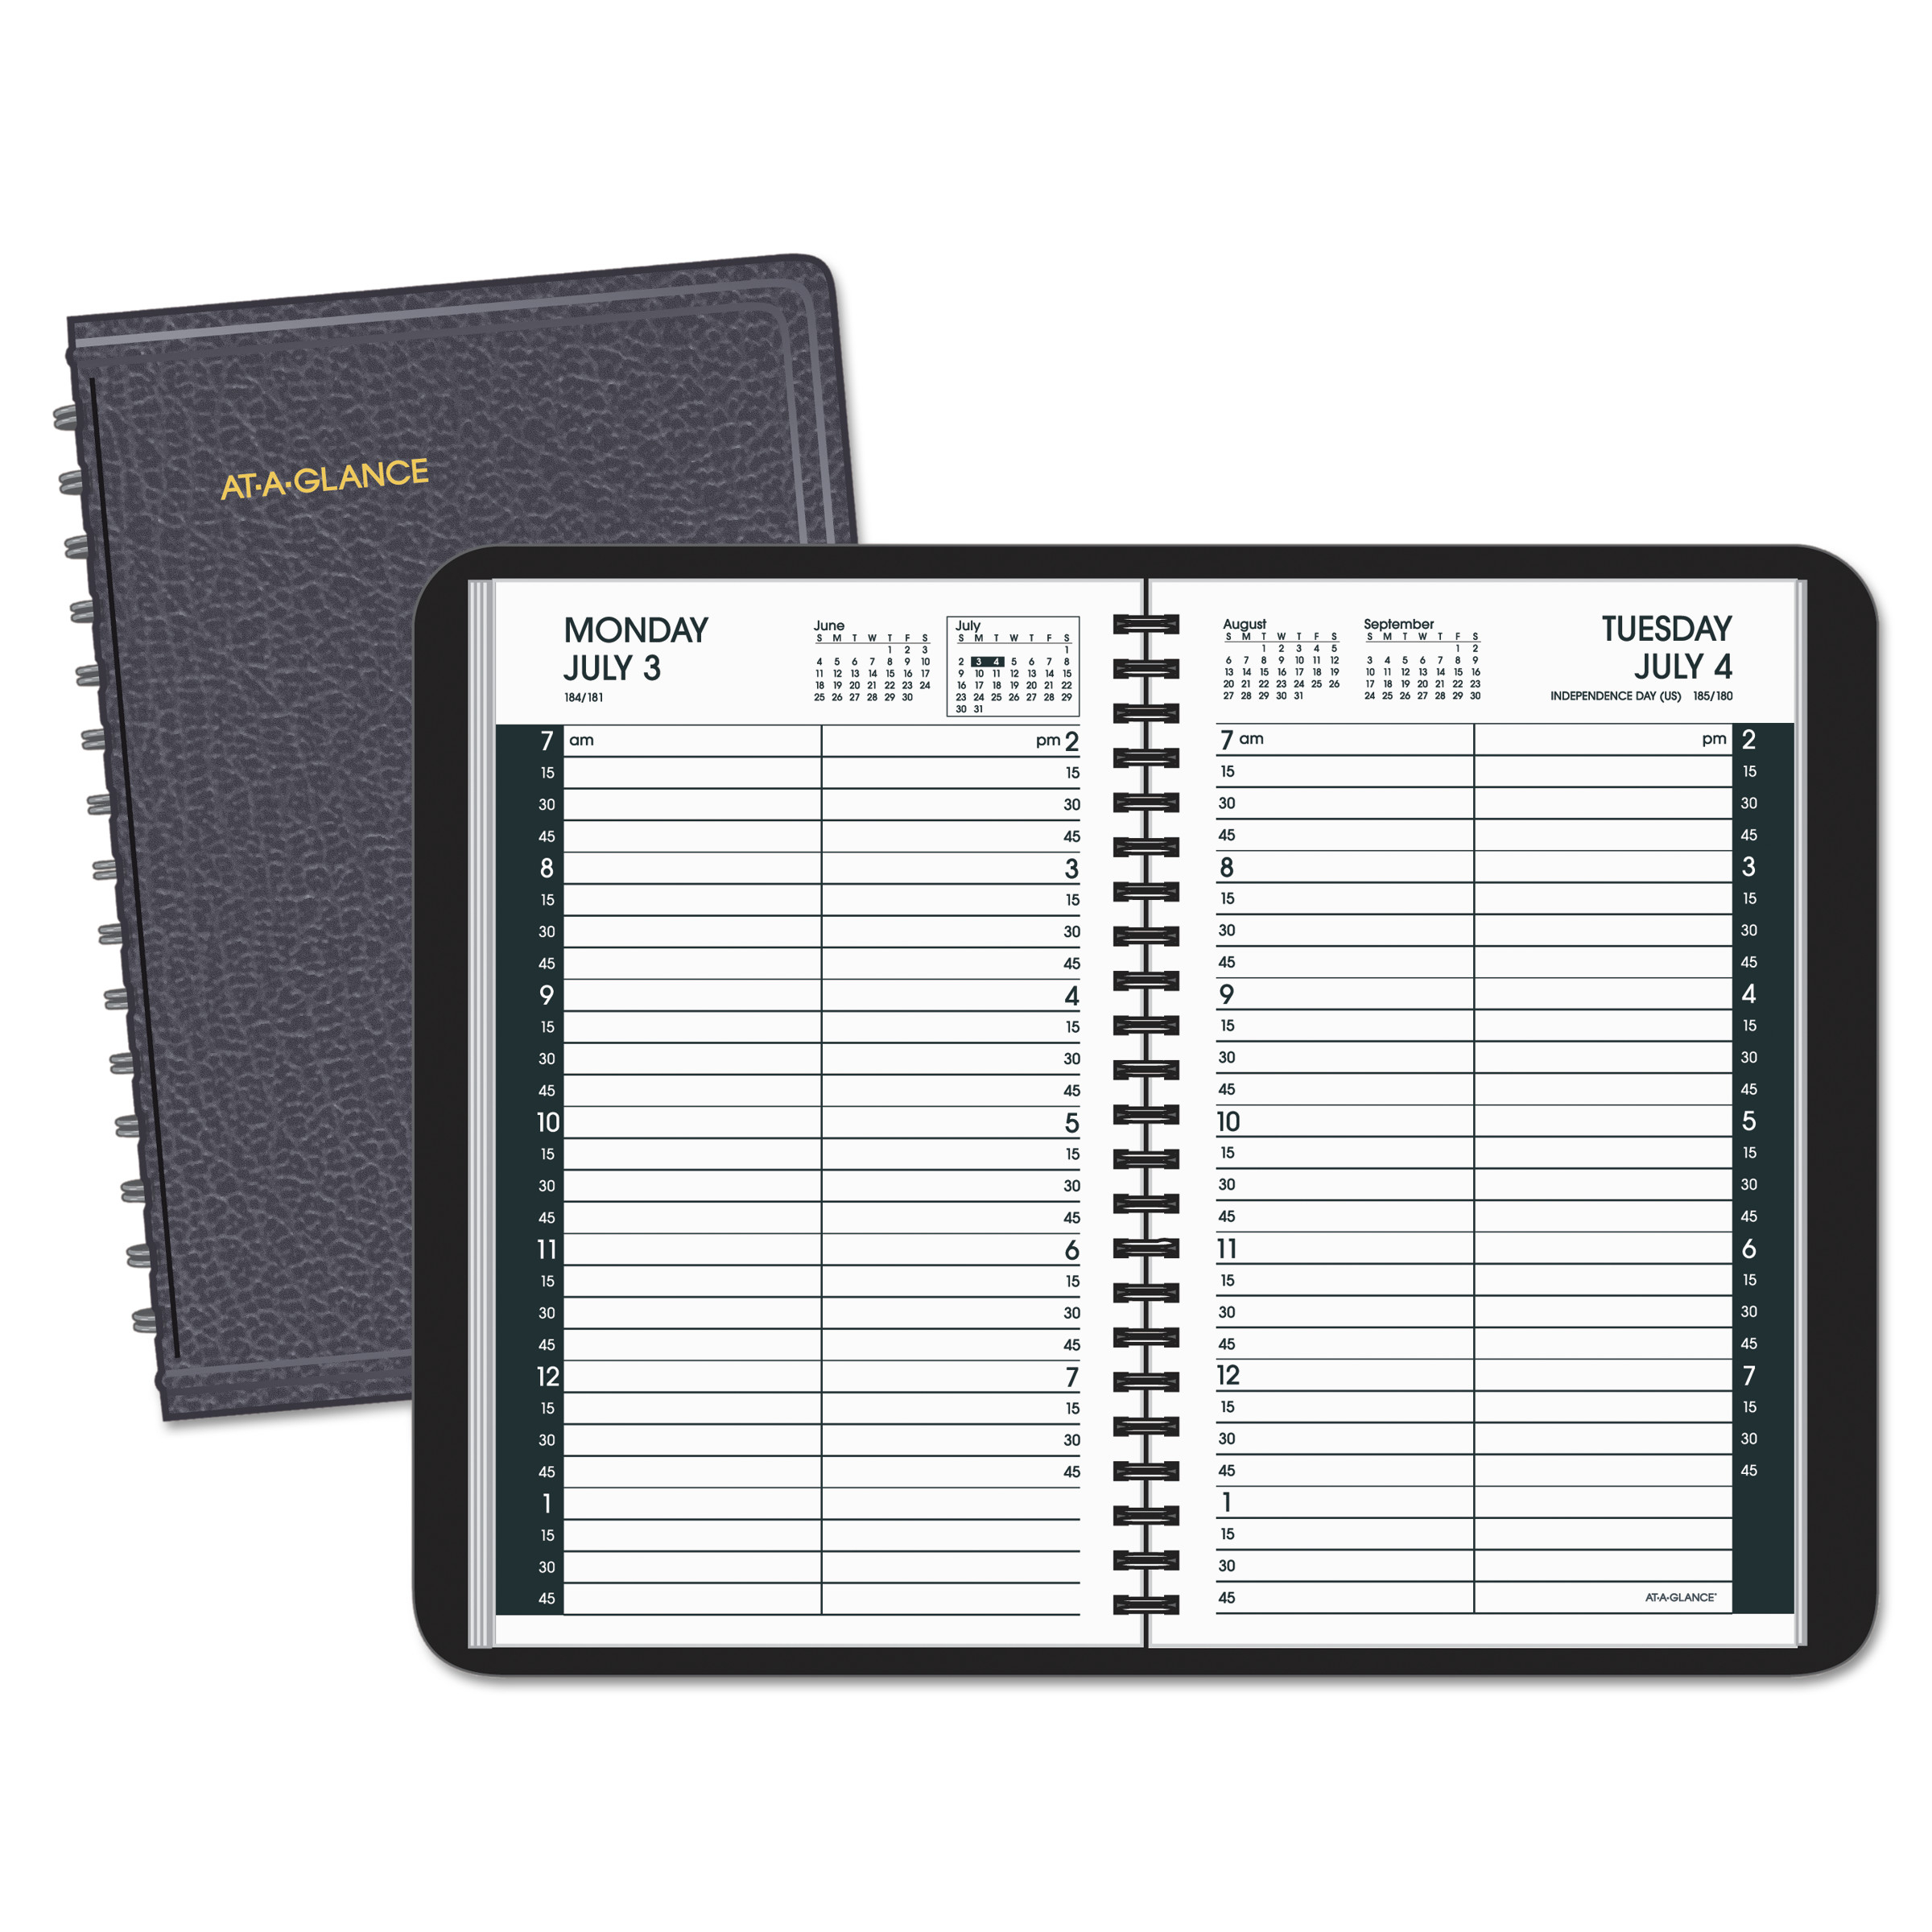 At-A-Glance Daily Appointment Book With 15-Minute